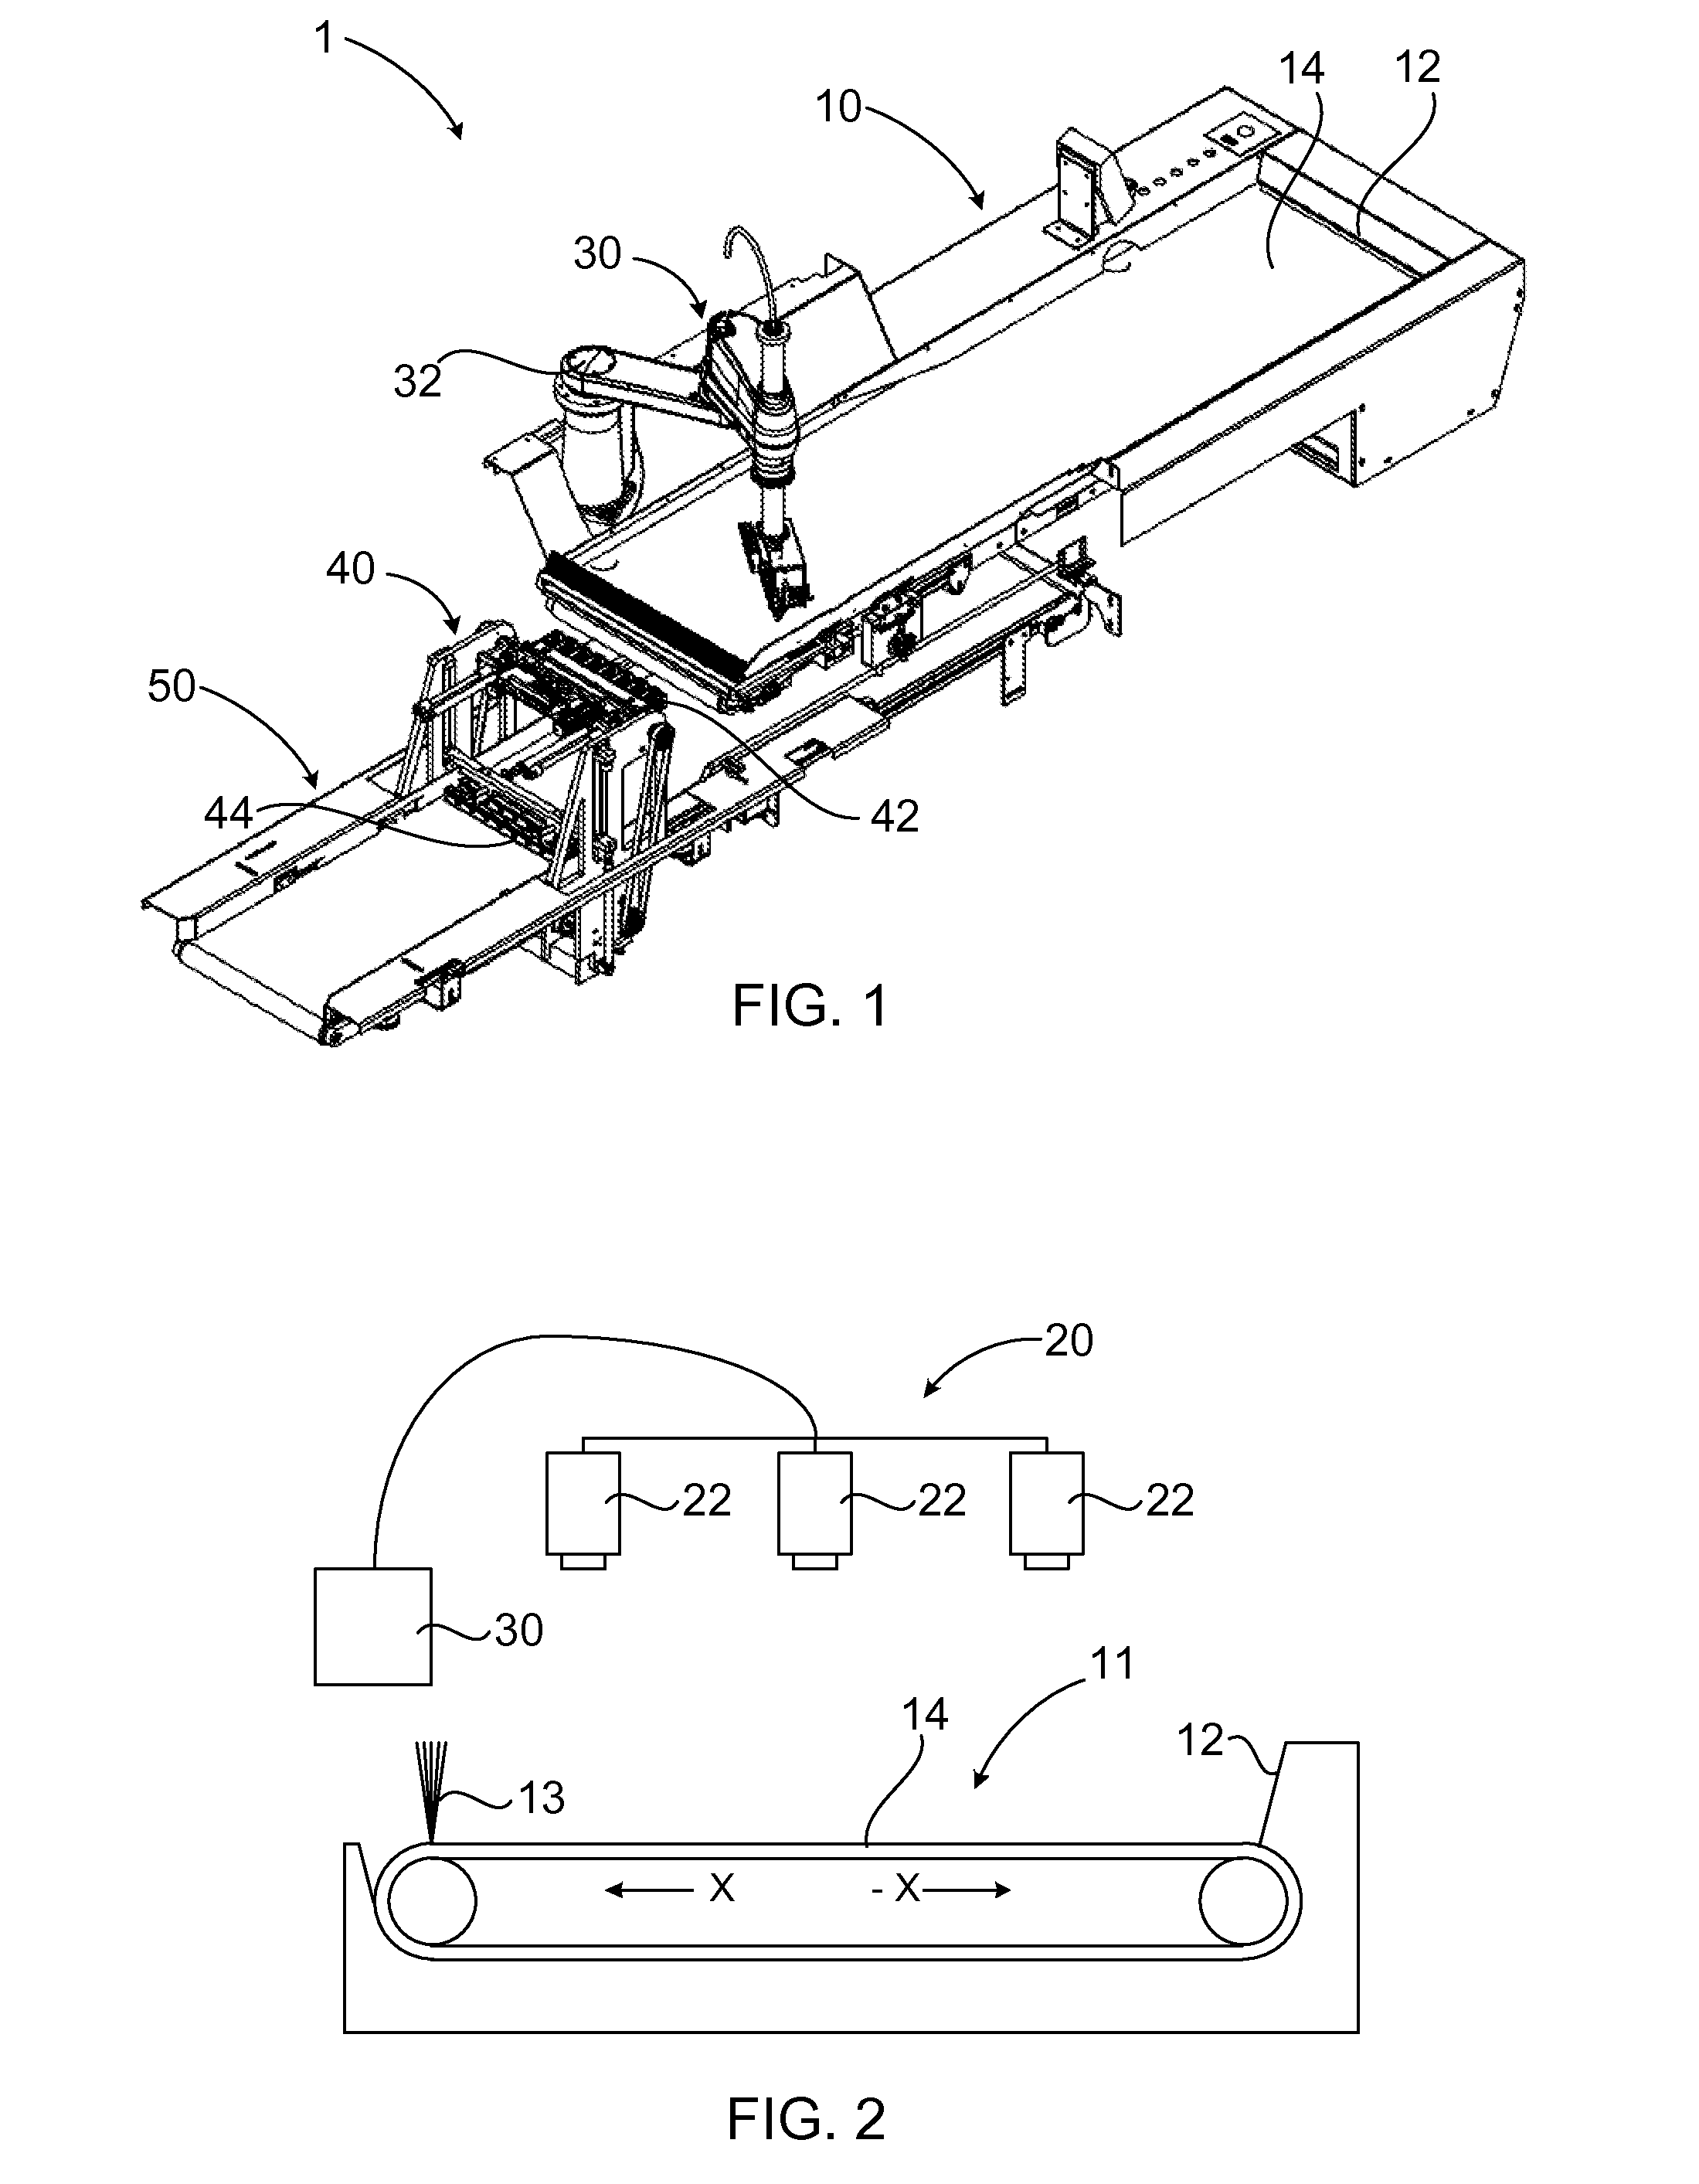 Apparatus and method for placing plant cuttings and cutting holding unit for planting cuttings in a cultivation medium